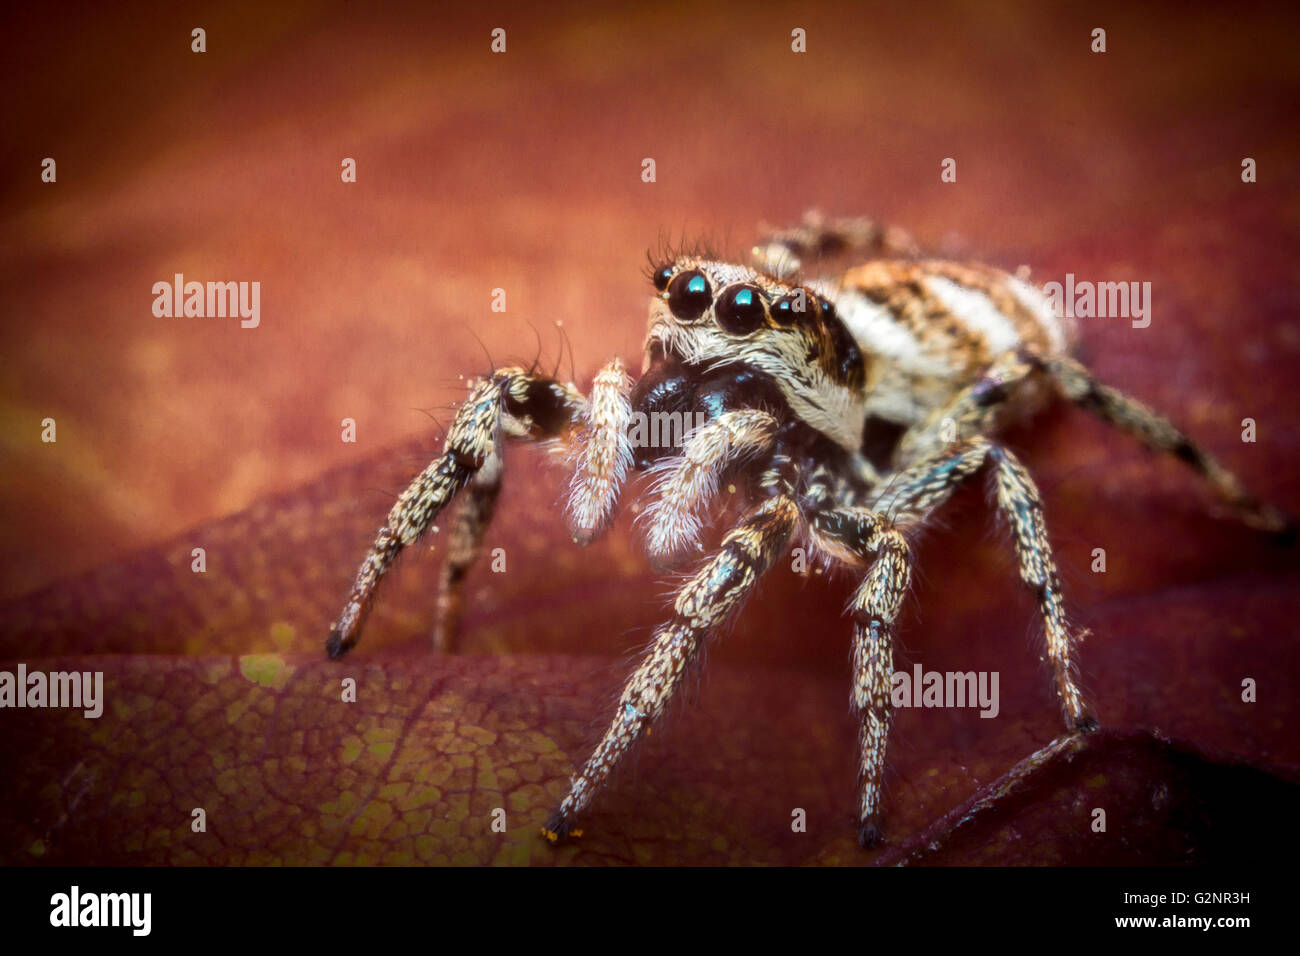 Super macro close up jumping spider on red leaf Stock Photo